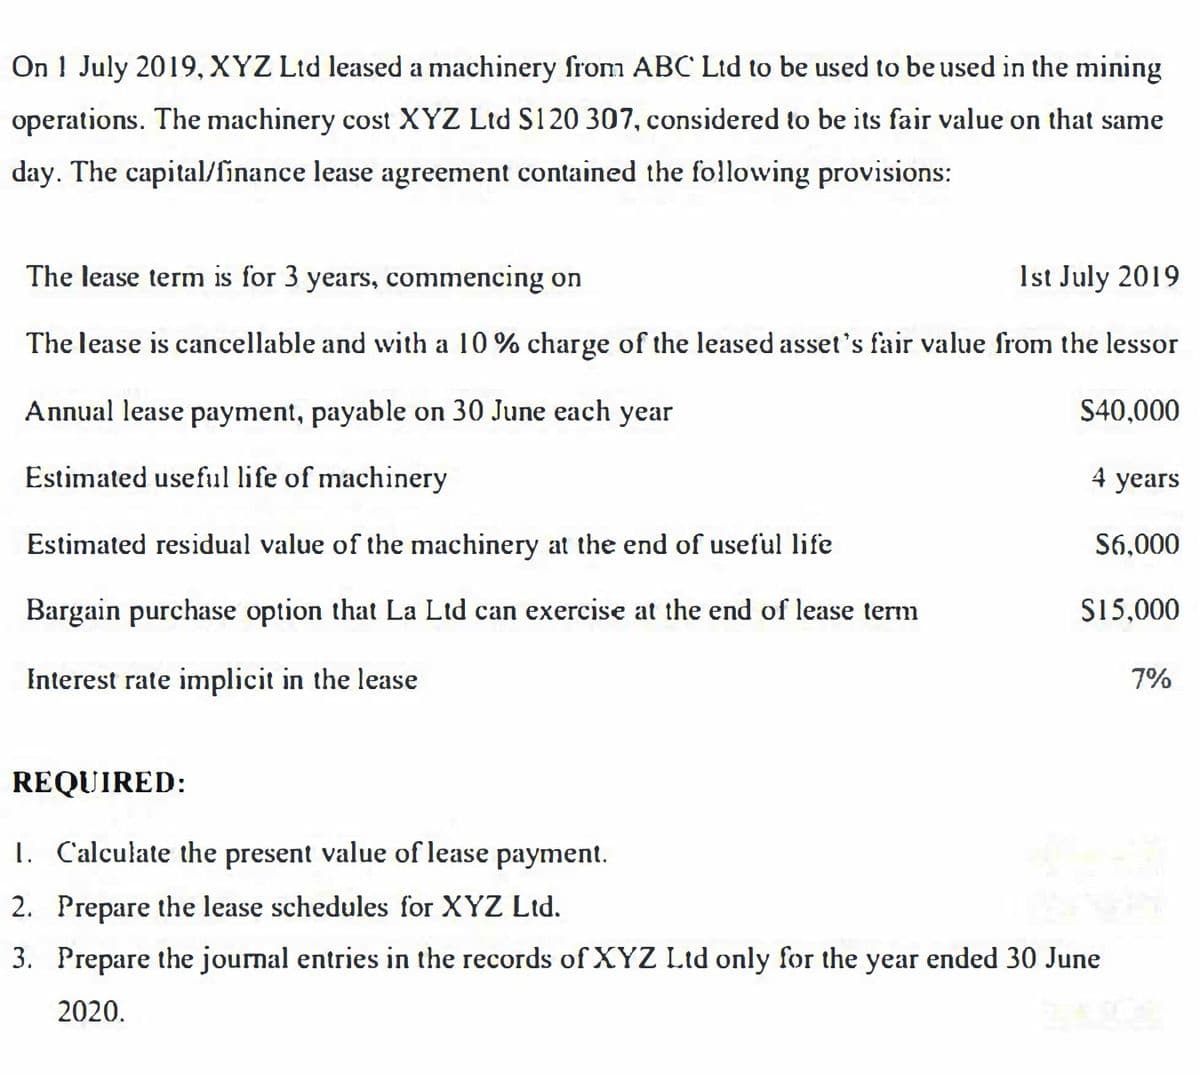 On 1 July 2019, XYZ Ltd leased a machinery from ABC Lid to be used to be used in the mining
operations. The machinery cost XYZ Ltd S120 307, considered to be its fair value on that same
day. The capital/finance lease agreement contained the fo!llowing provisions:
The lease term is for 3 years, commencing on
1st July 2019
The lease is cancellable and with a 10 % charge of the leased asset's fair value from the lessor
Annual lease payment, payable on 30 June each year
S40,000
Estimated useful life of machinery
4 years
Estimated residual value of the machinery at the end of useful life
S6,000
Bargain purchase option that La Ltd can exercise at the end of lease term
S15,000
Interest rate implicit in the lease
7%
REQUIRED:
1. Calculate the present value of lease payment.
2. Prepare the lease schedules for XYZ Ltd.
3. Prepare the journal entries in the records of XYZ Ltd only for the year ended 30 June
2020.
